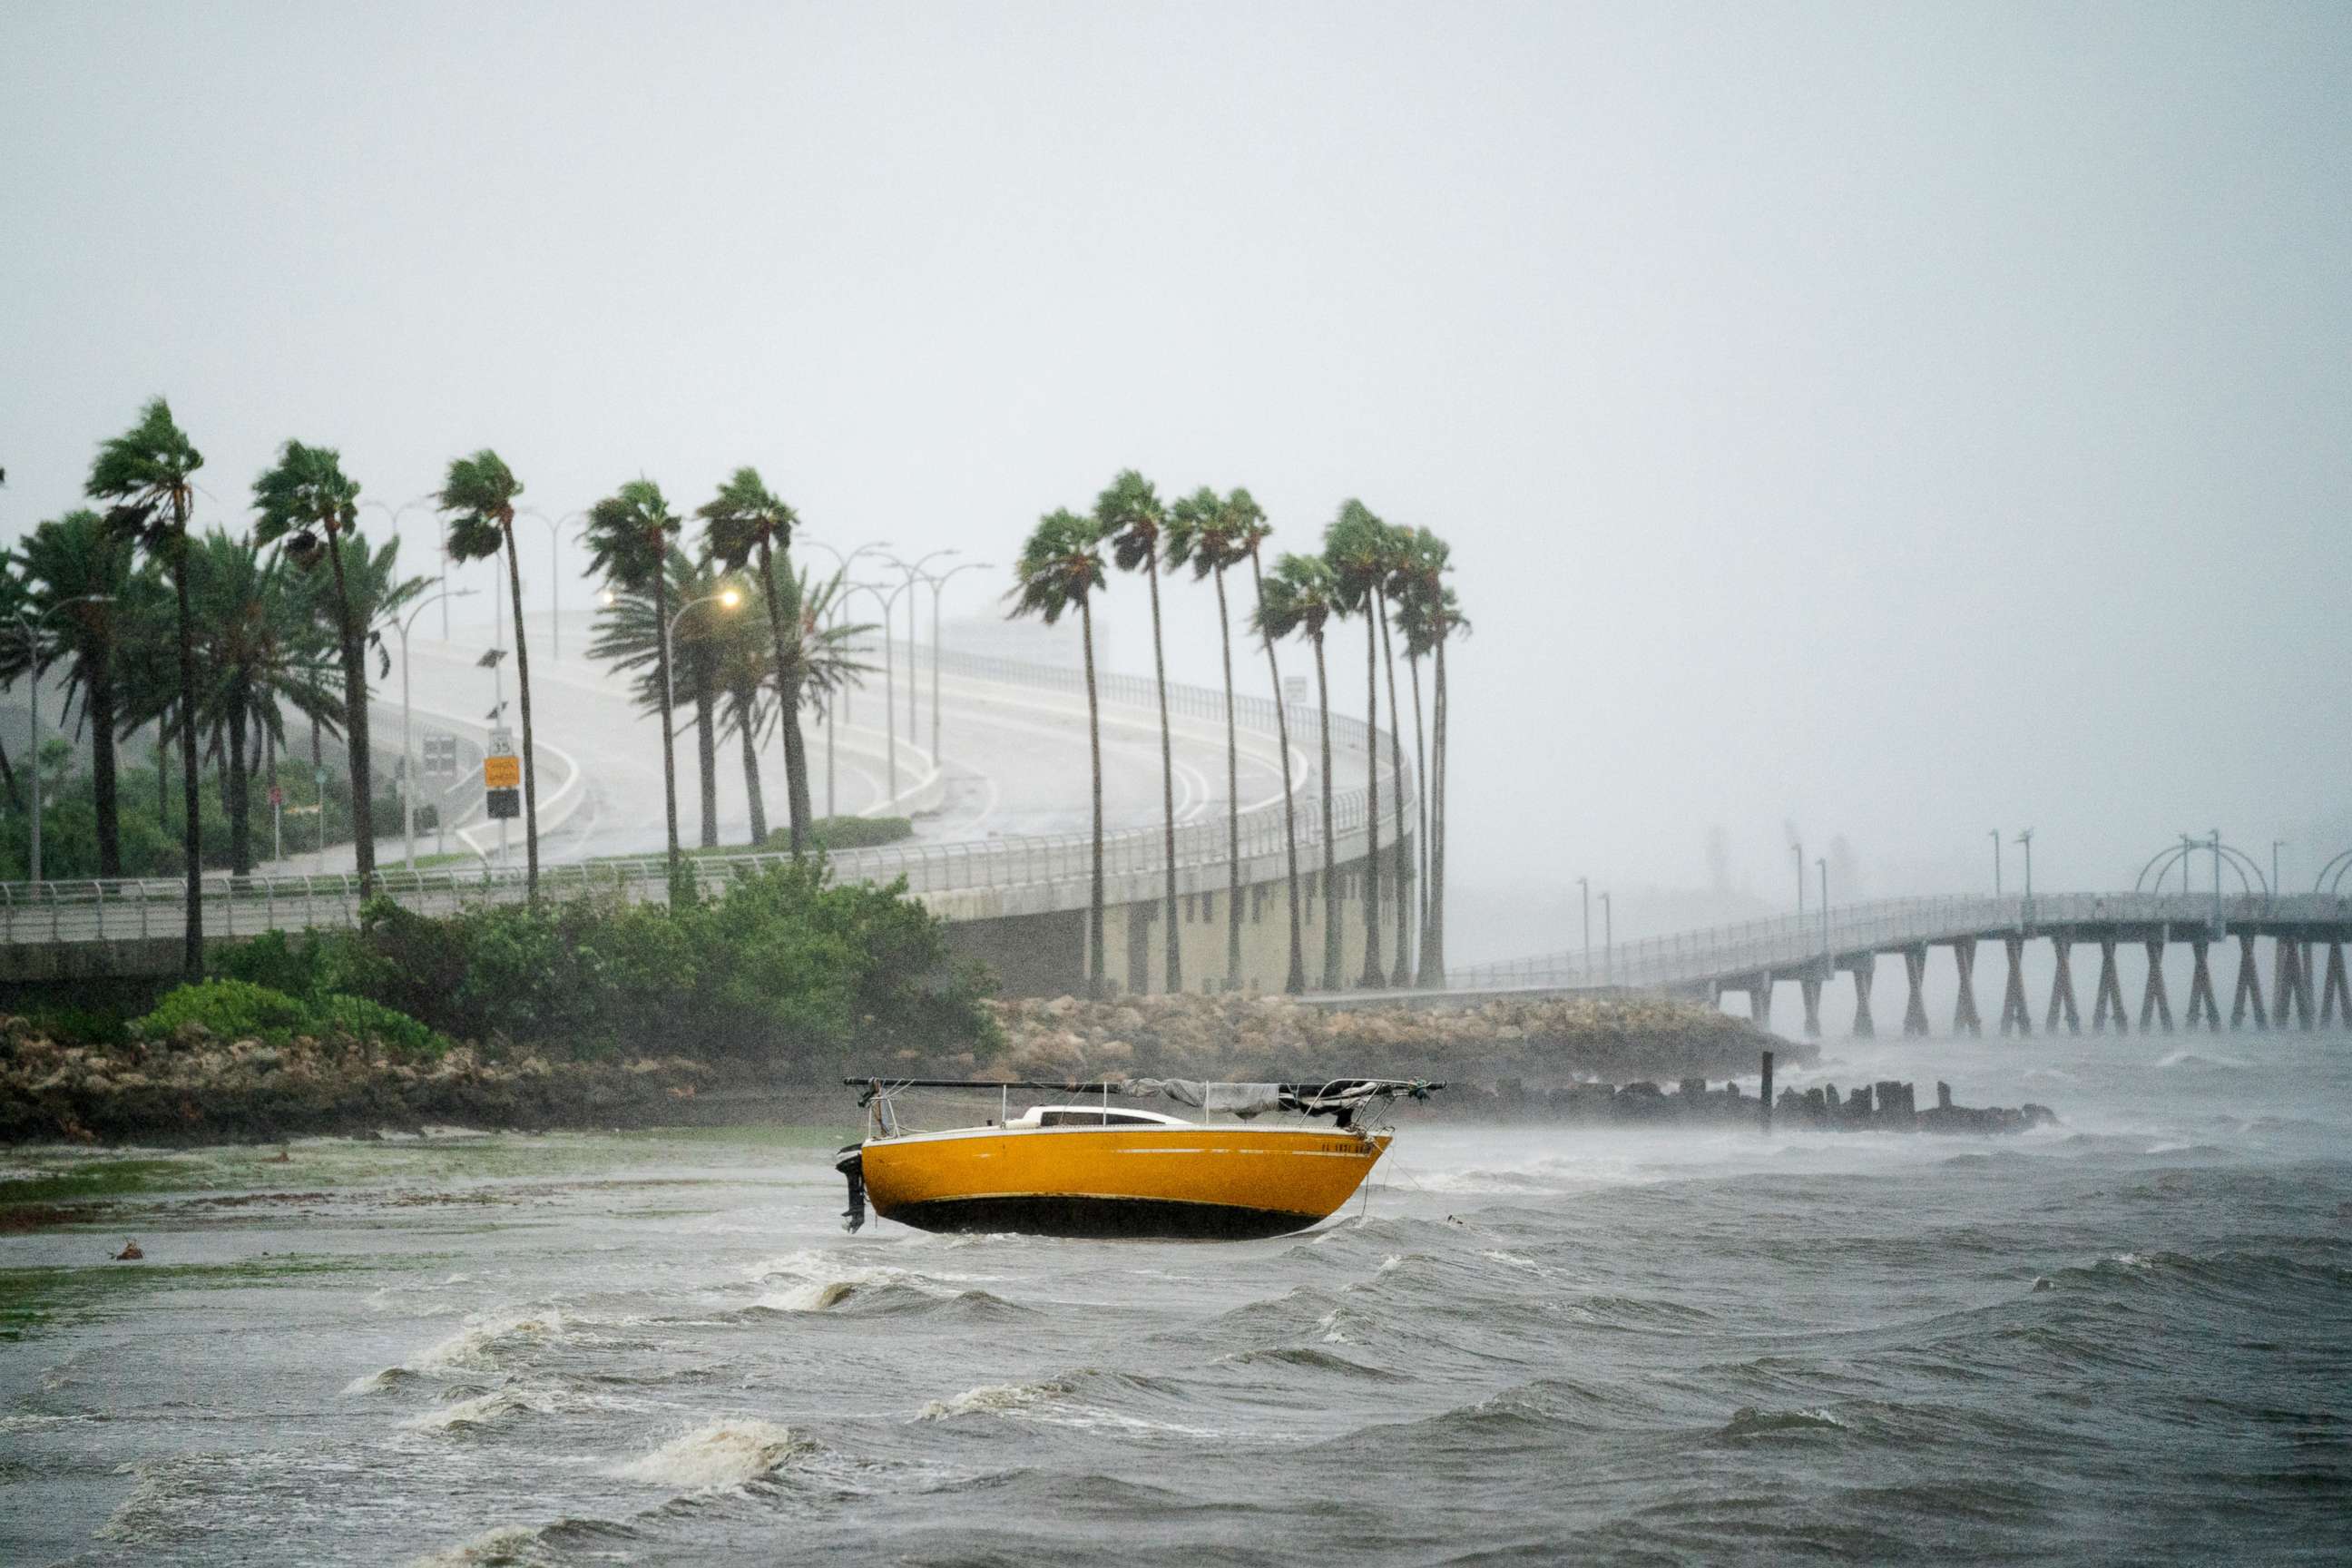 PHOTO: A sail boat is washed into shallow waters at Sarasota Bay as Hurricane Ian approaches on Sept. 28, 2022, in Sarasota, Fla.